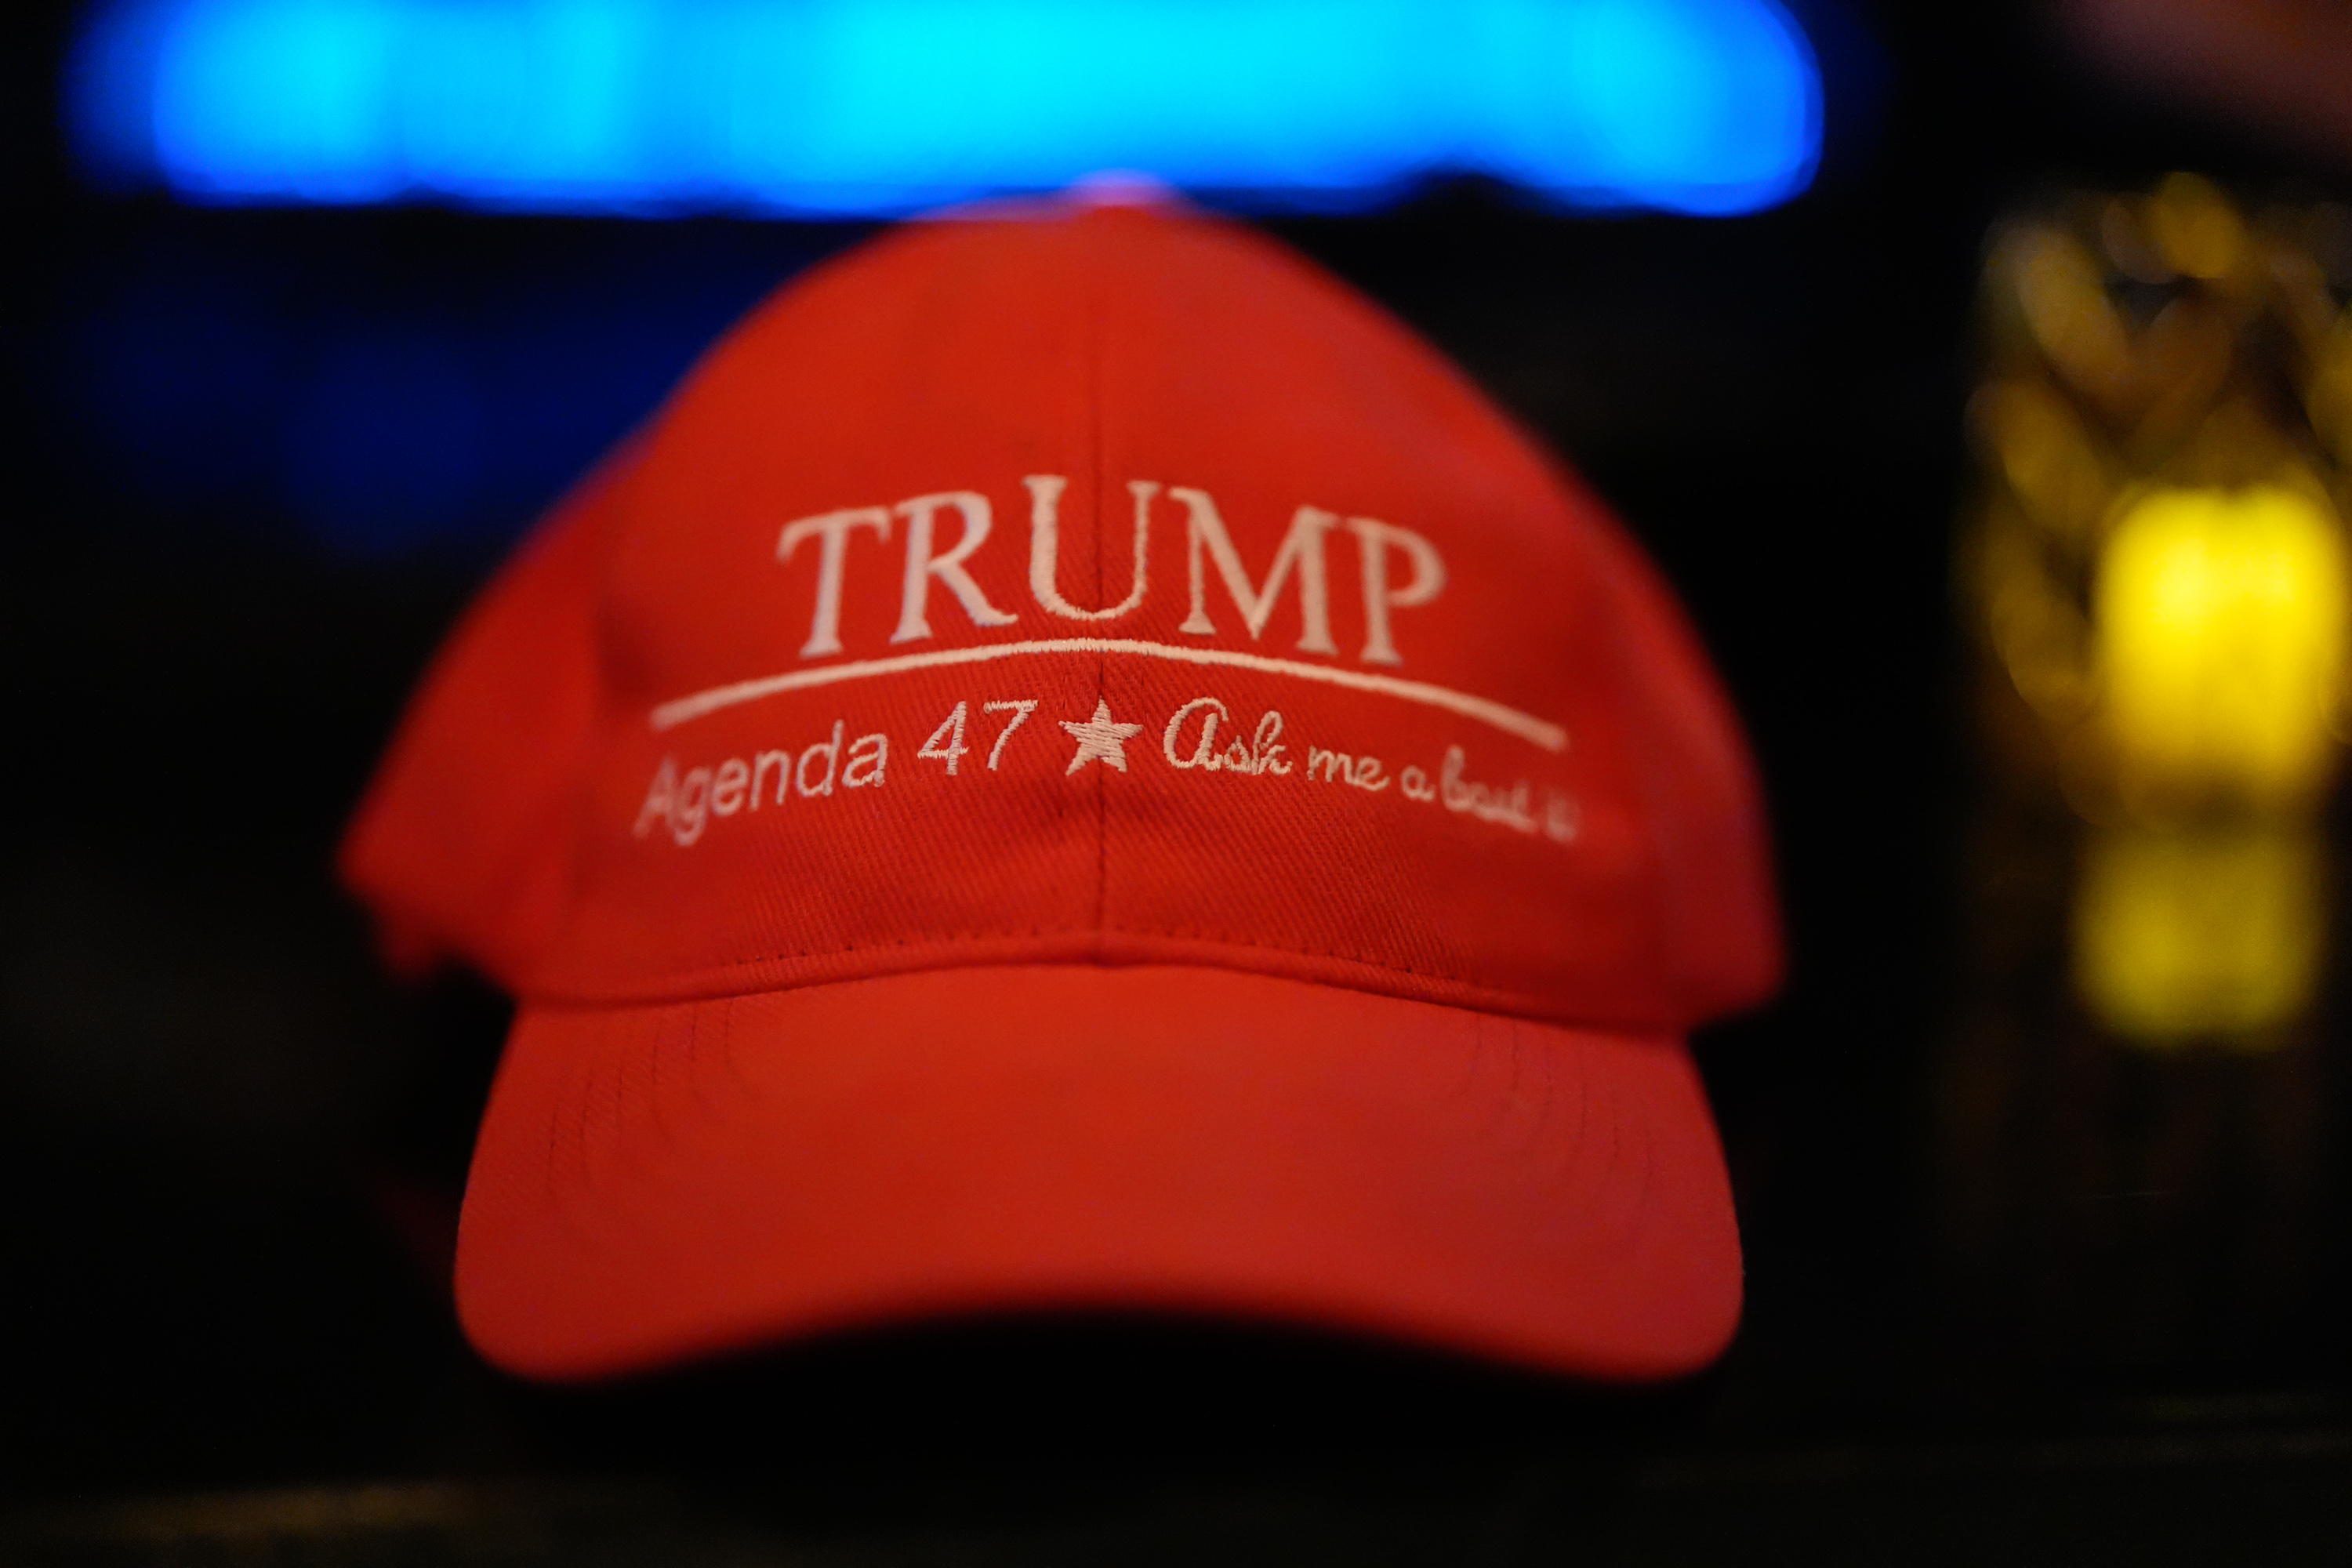 The image shows a red baseball cap with &quot;TRUMP&quot; in white letters, followed by &quot;Agenda 47 * Ask me about it&quot; embroidered underneath.